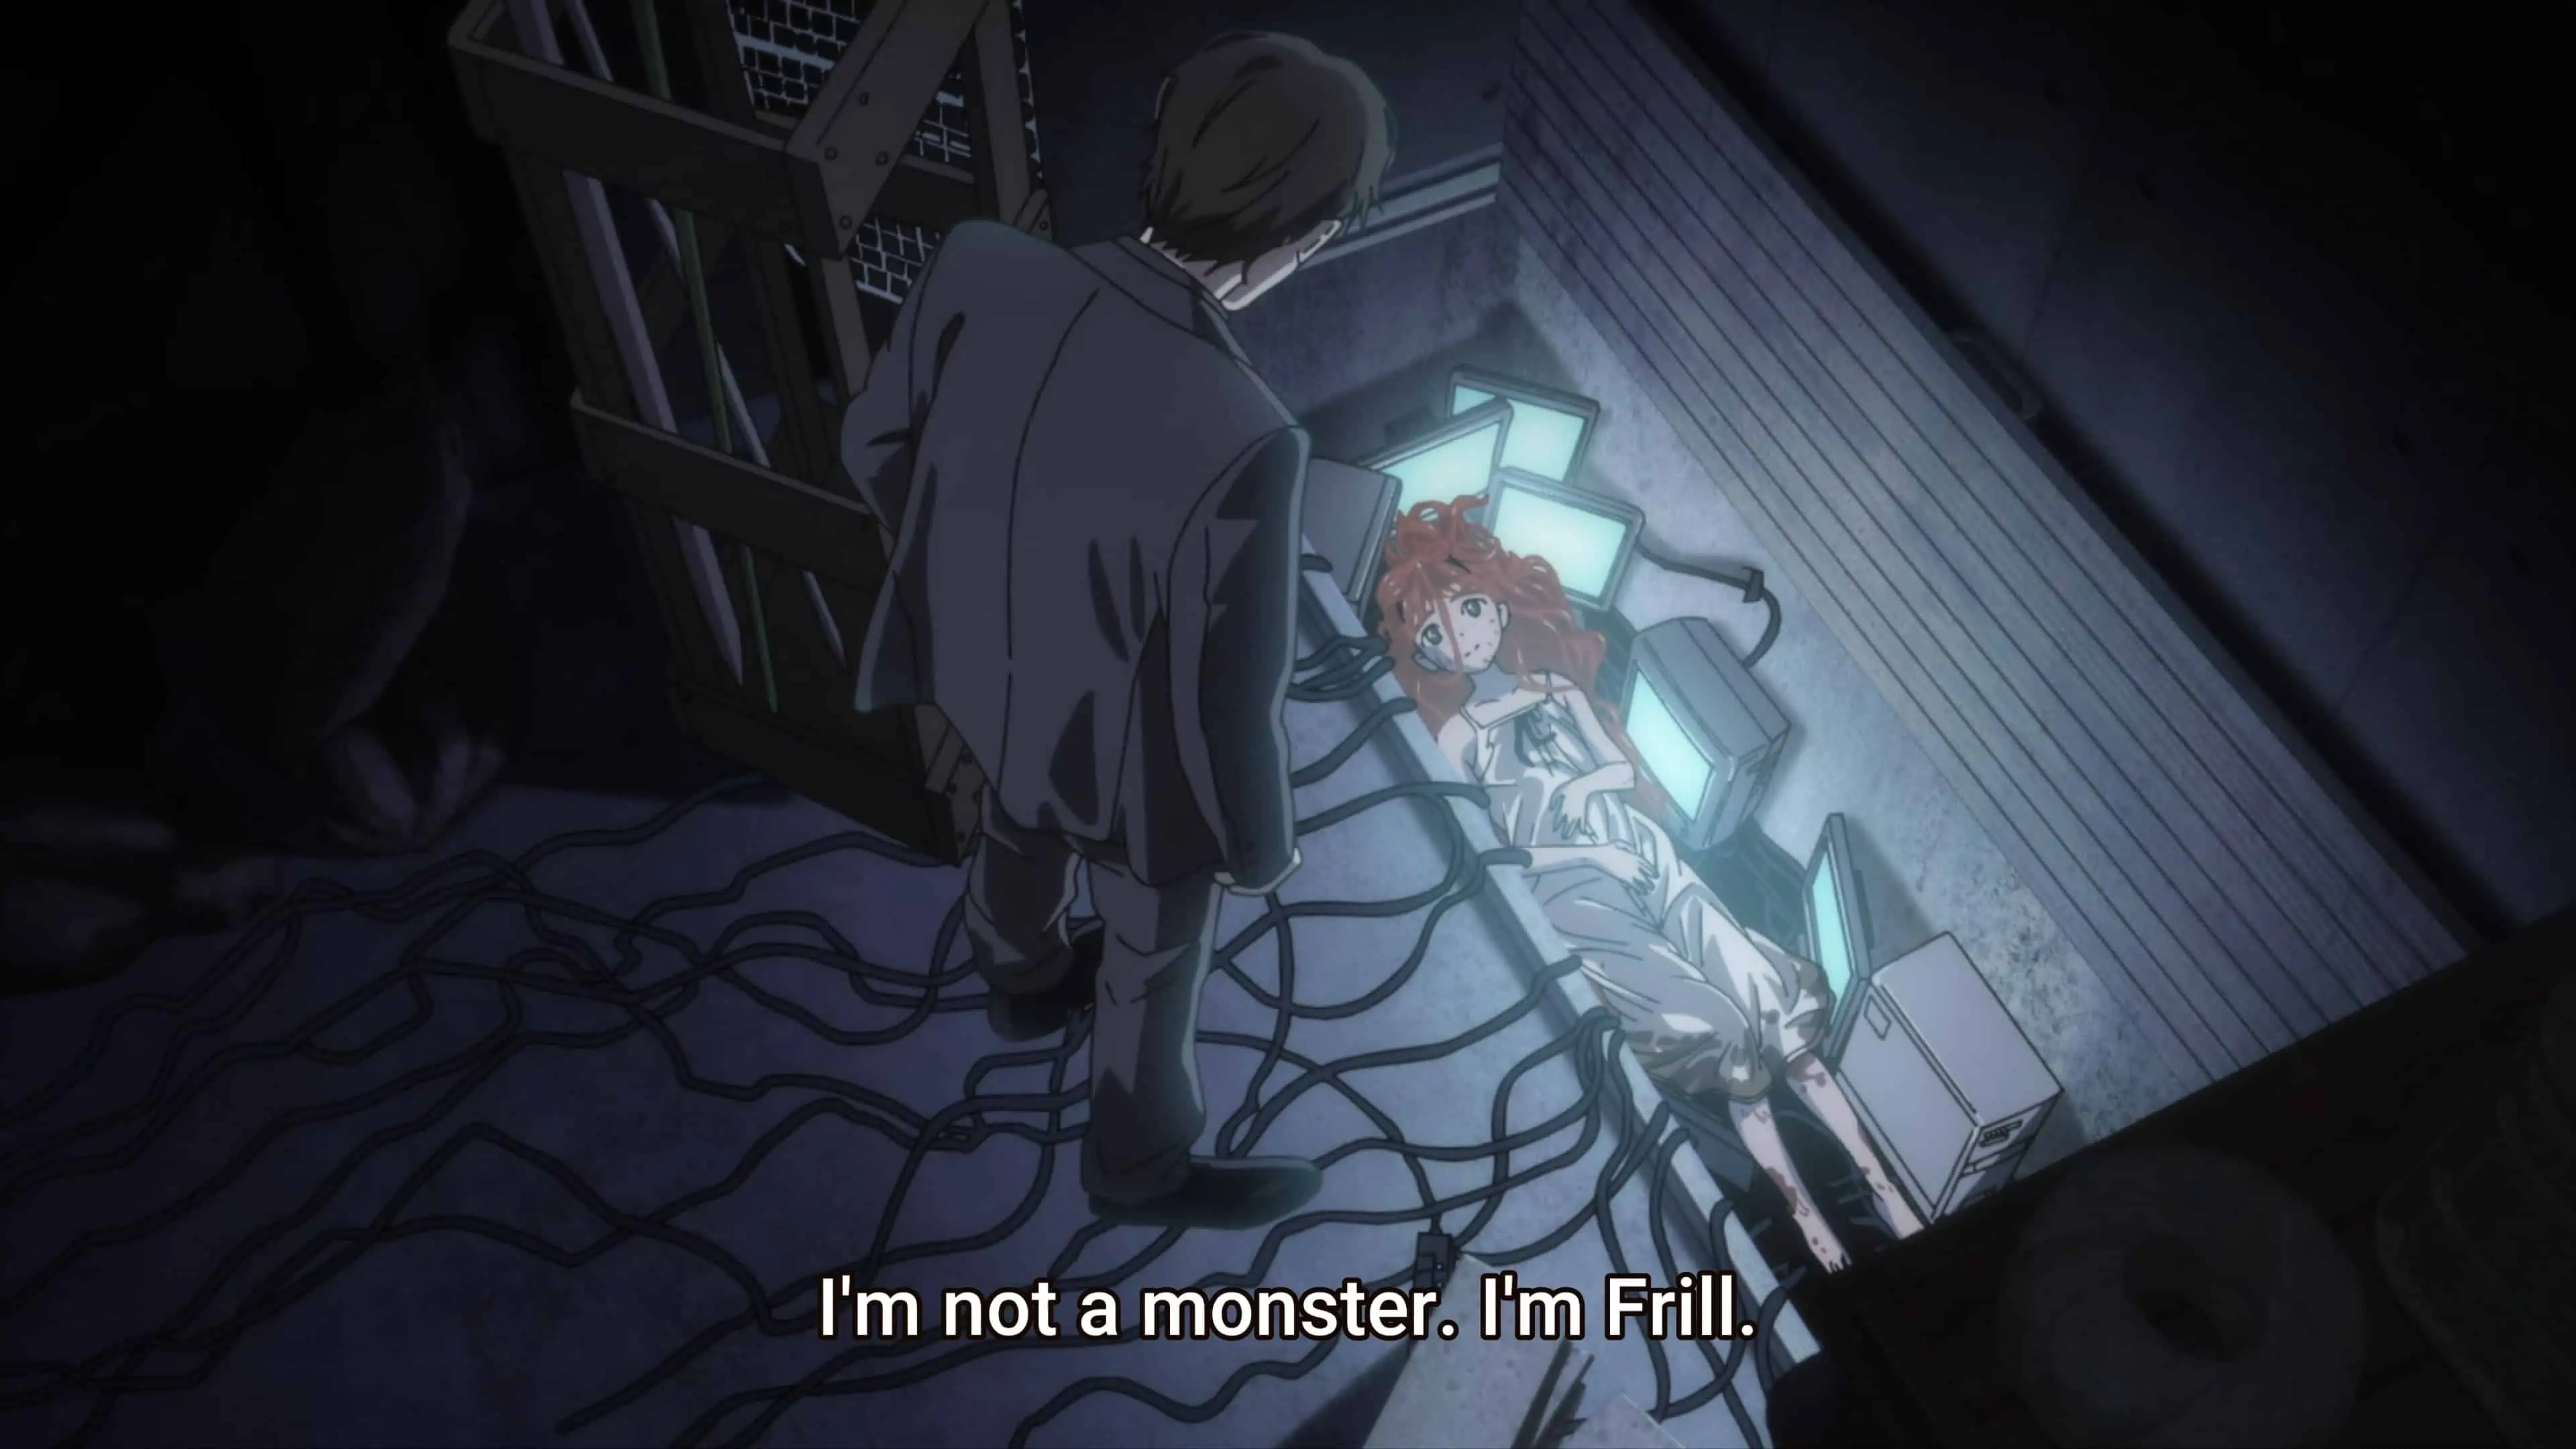 Frill trying to remind Ura-Acca she is not a monster